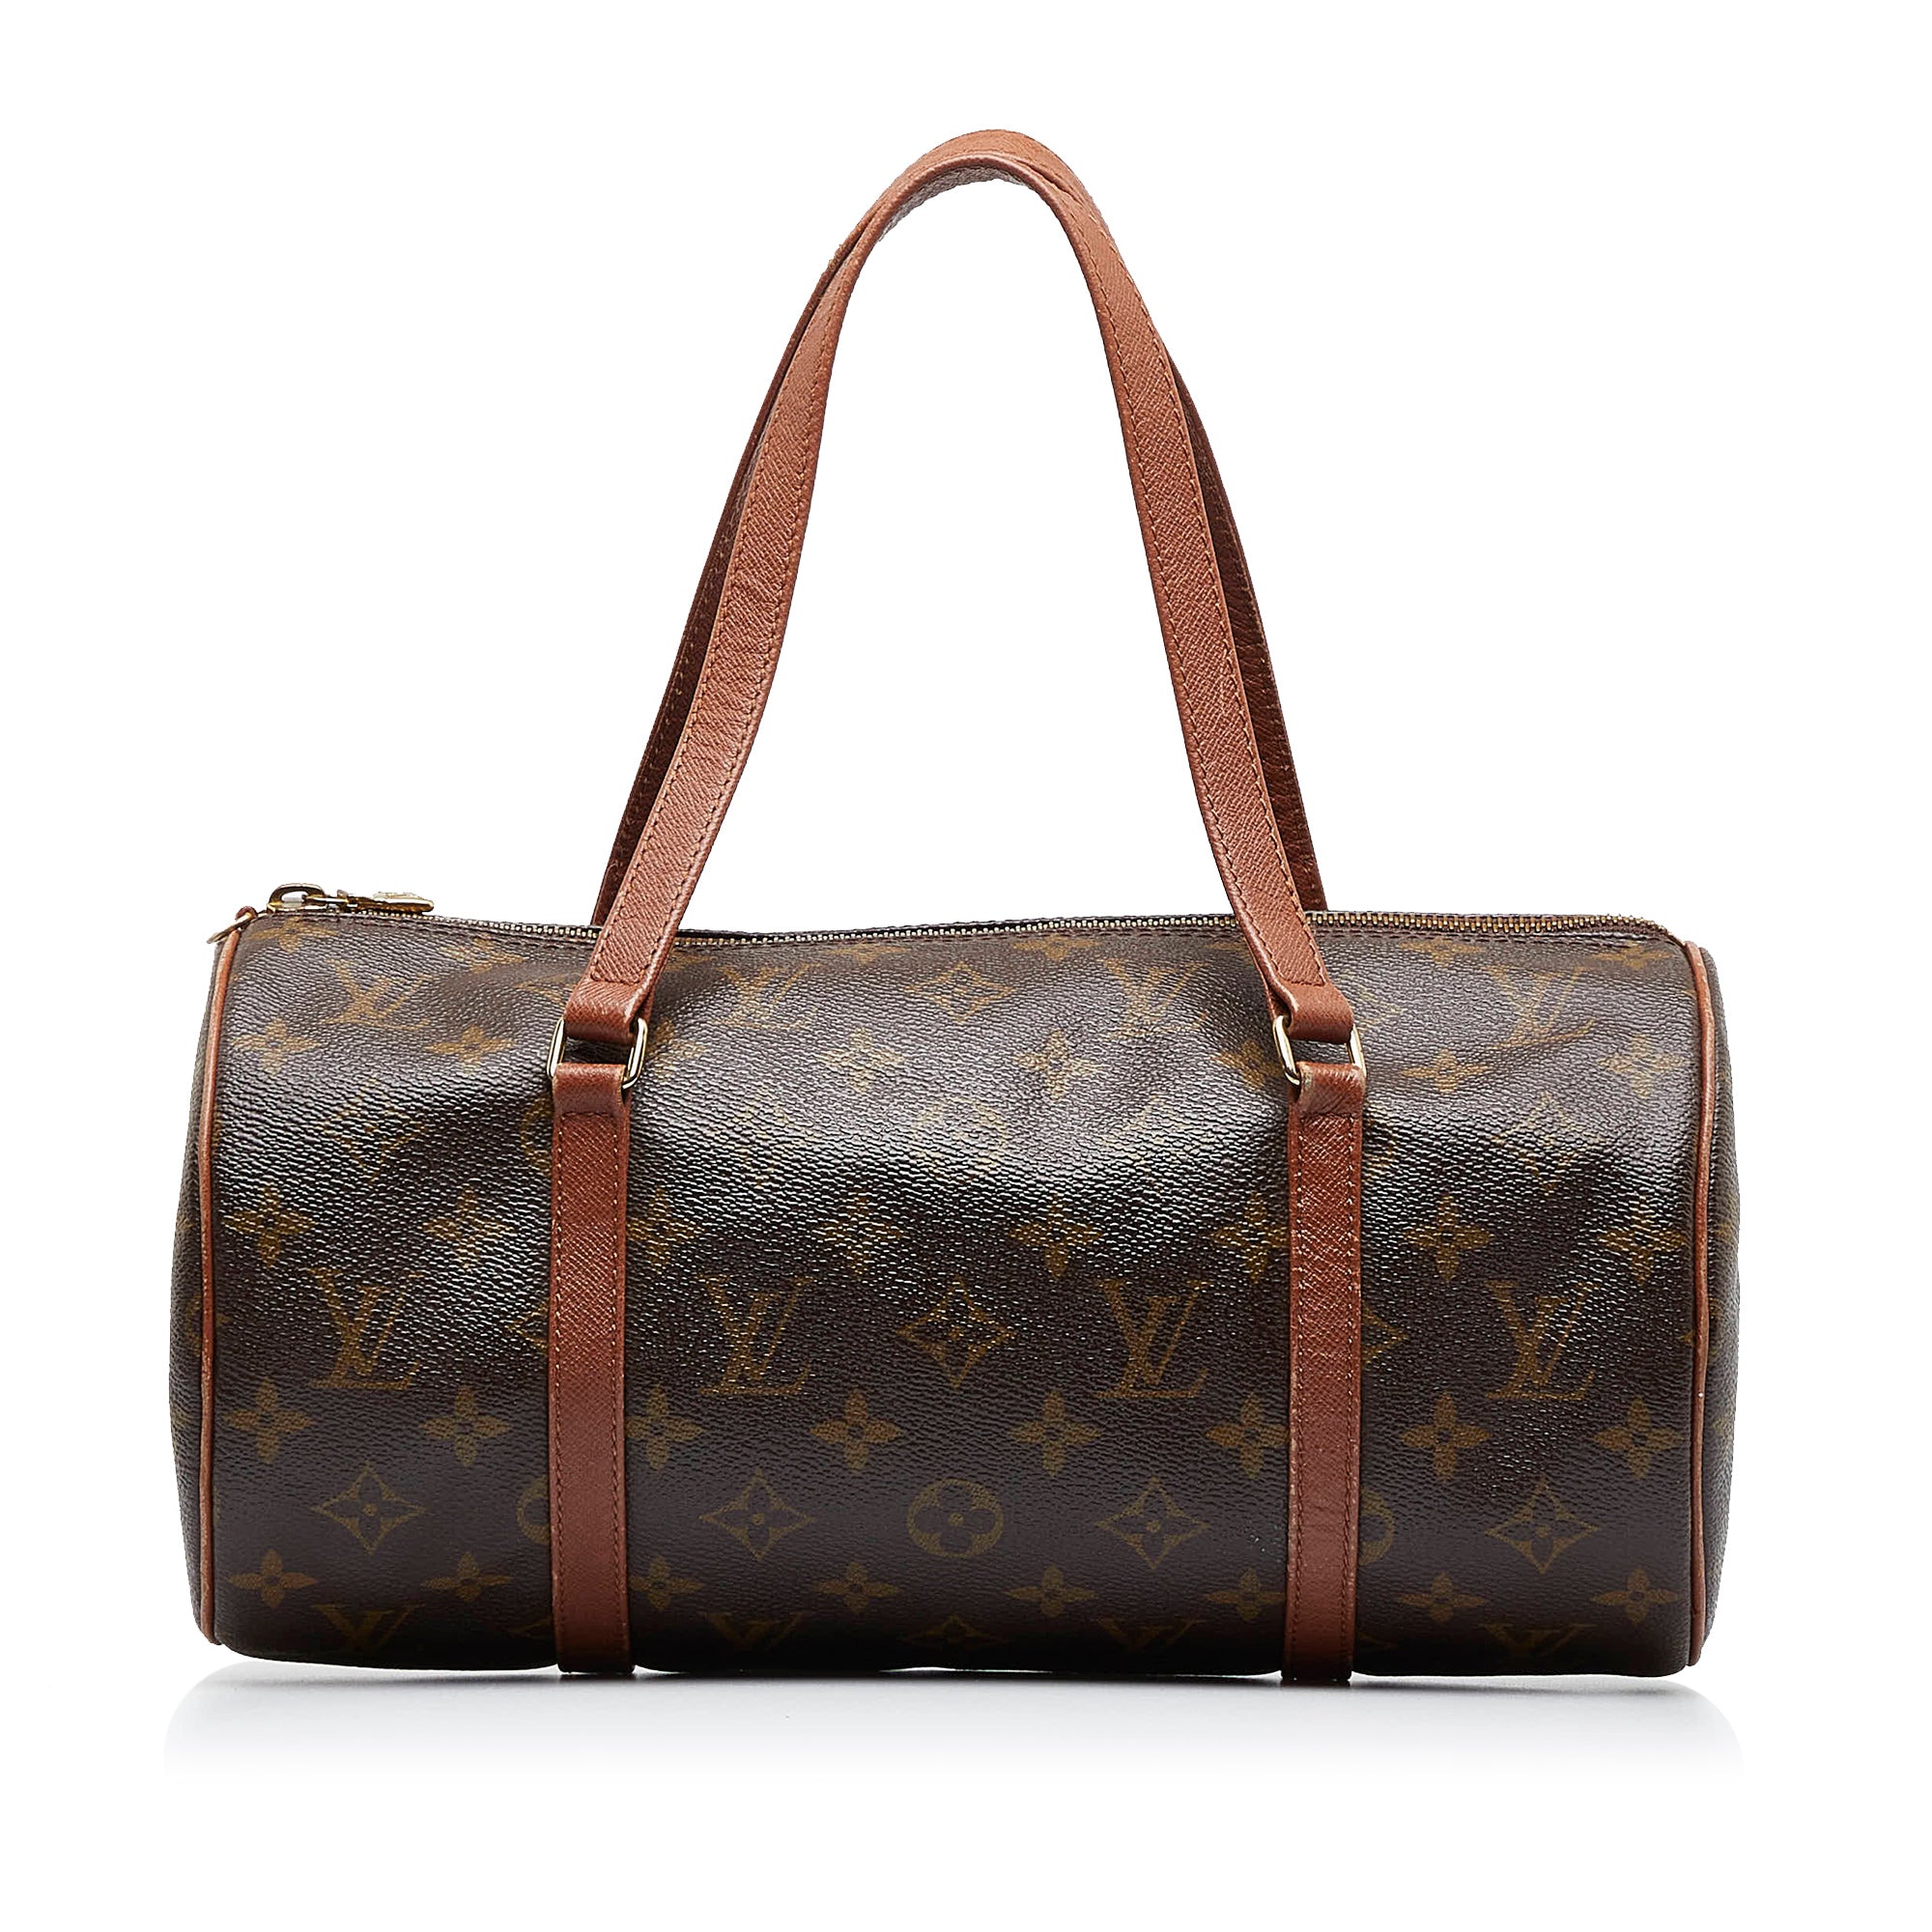 How to Authenticate the Louis Vuitton Neverfull - Academy by FASHIONPHILE